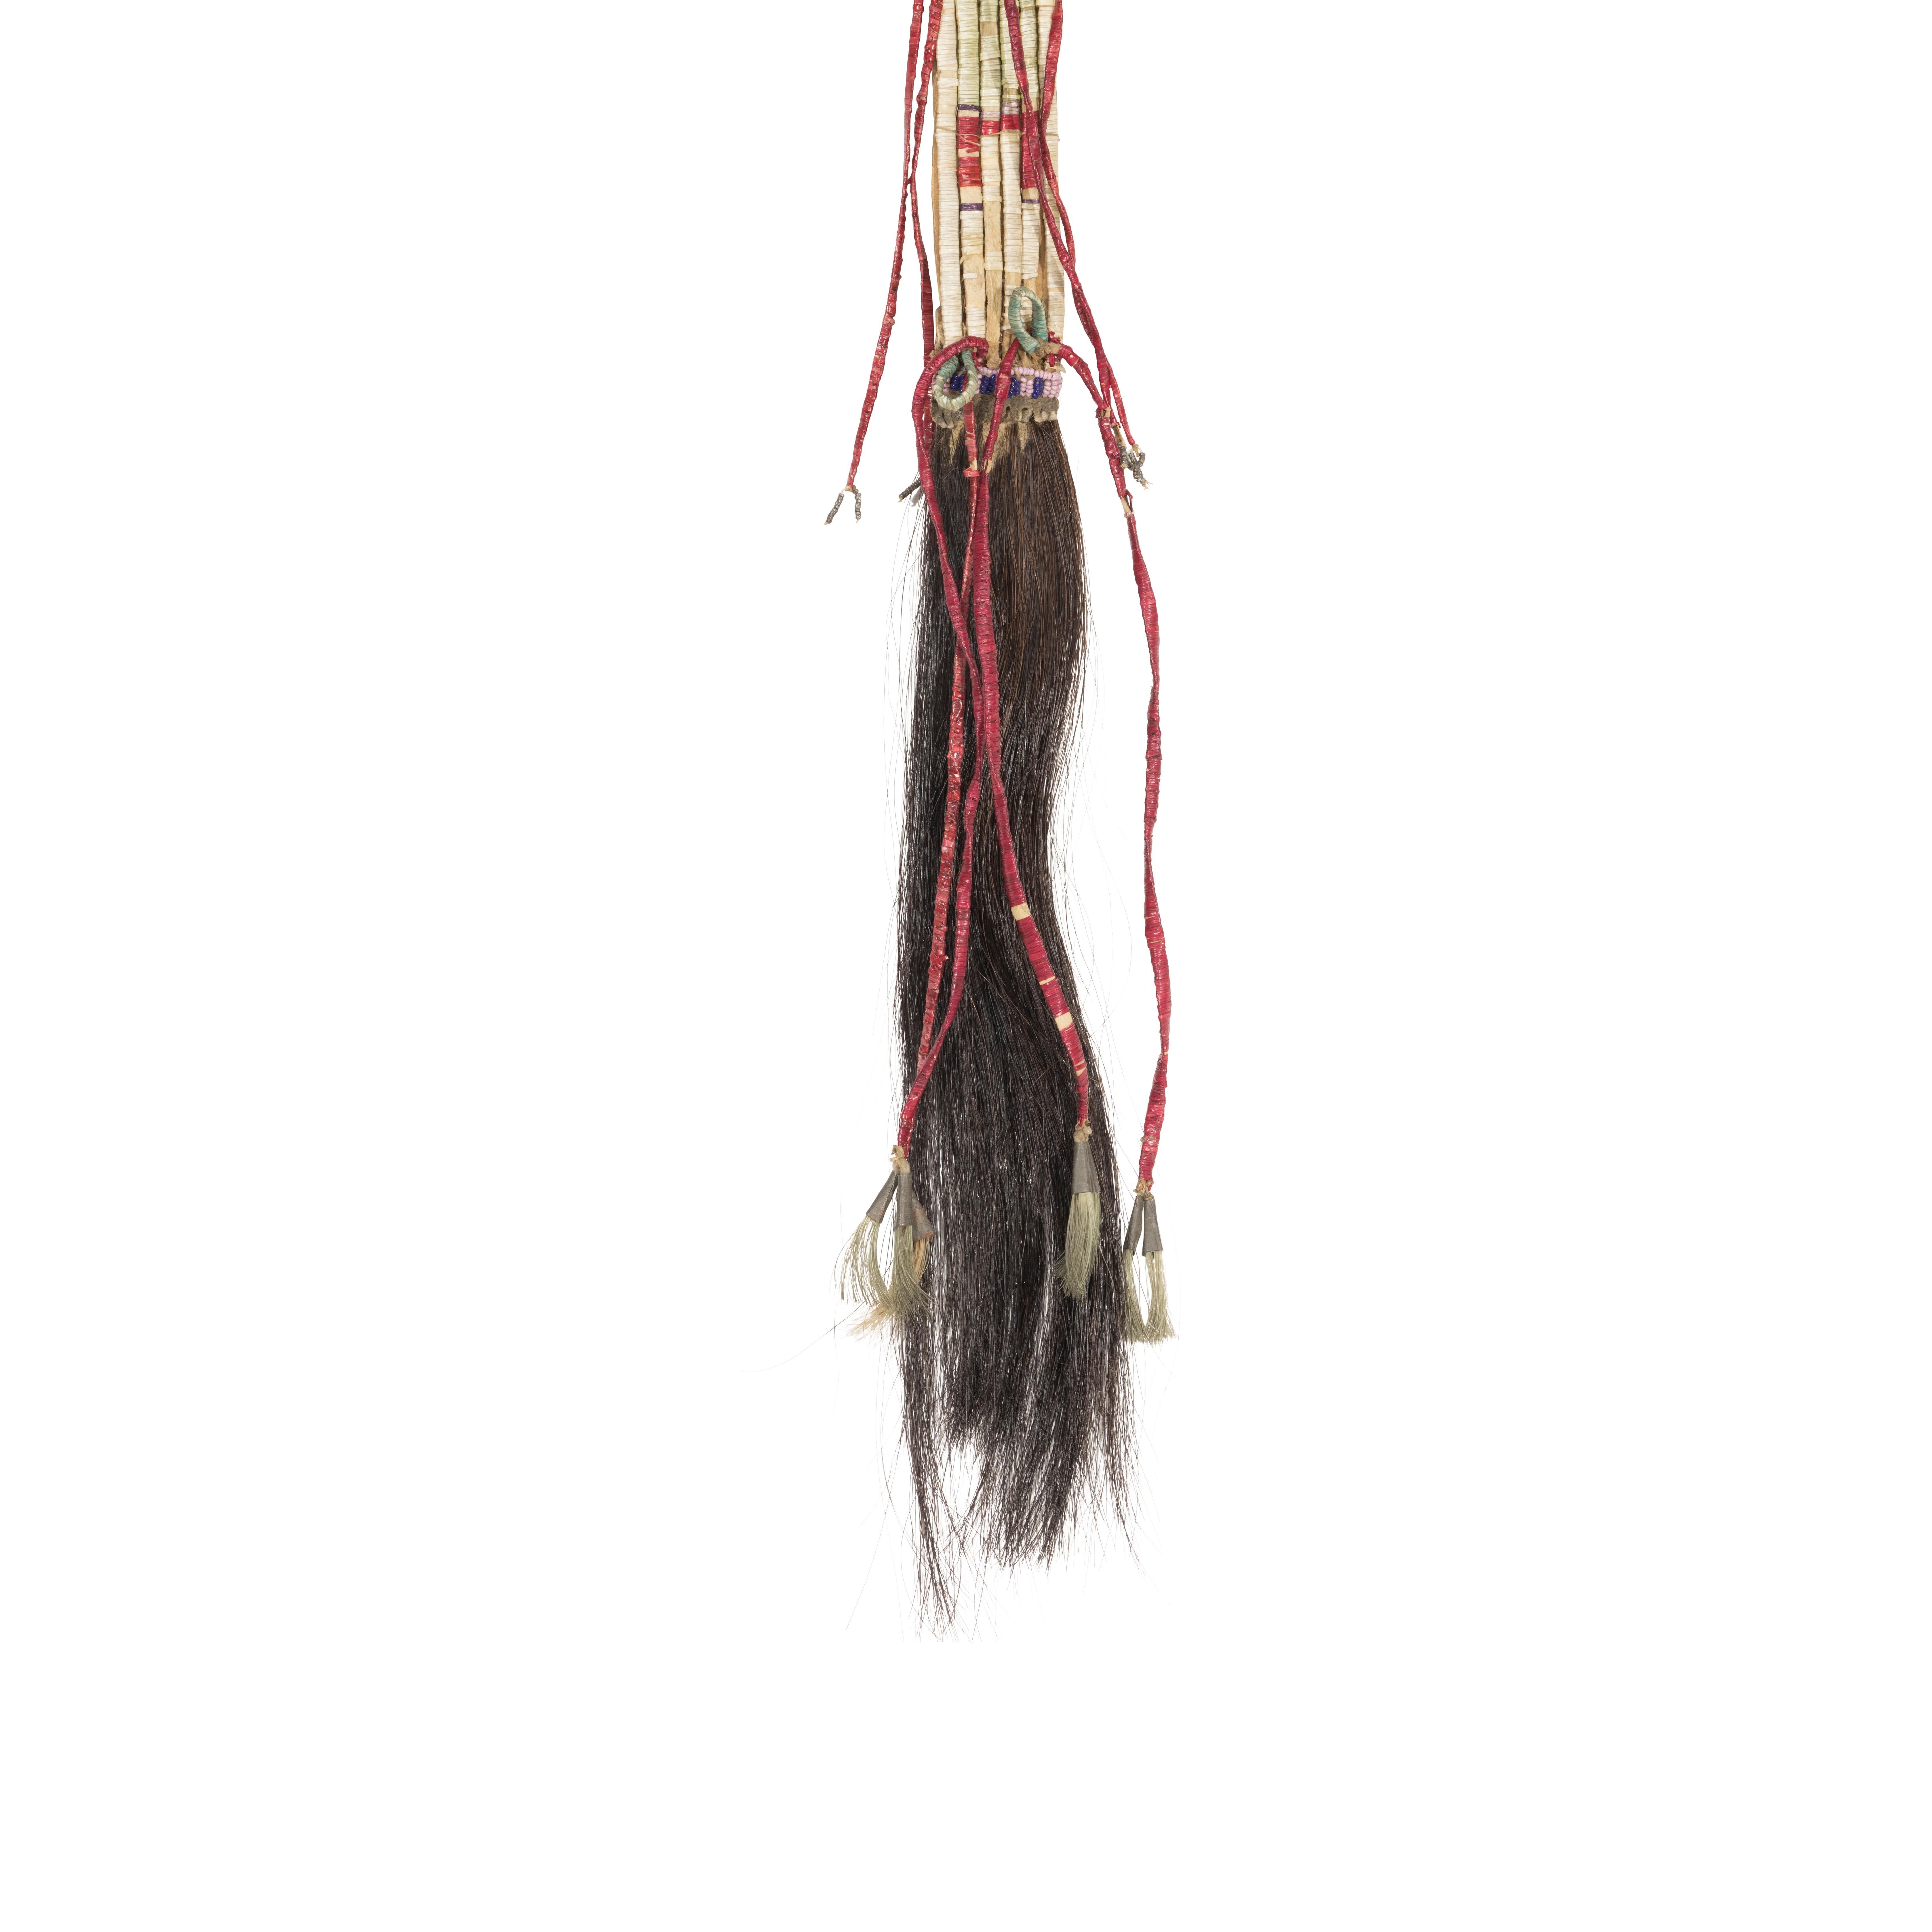 Northern Plains quilled hair drop in white, red and green. Quilled parfleche slats decorated with fully quilled hide thongs ending in tin cones and horsehair. A band of [ink and blue beading at bottom, and black and blue faceted beads at top.